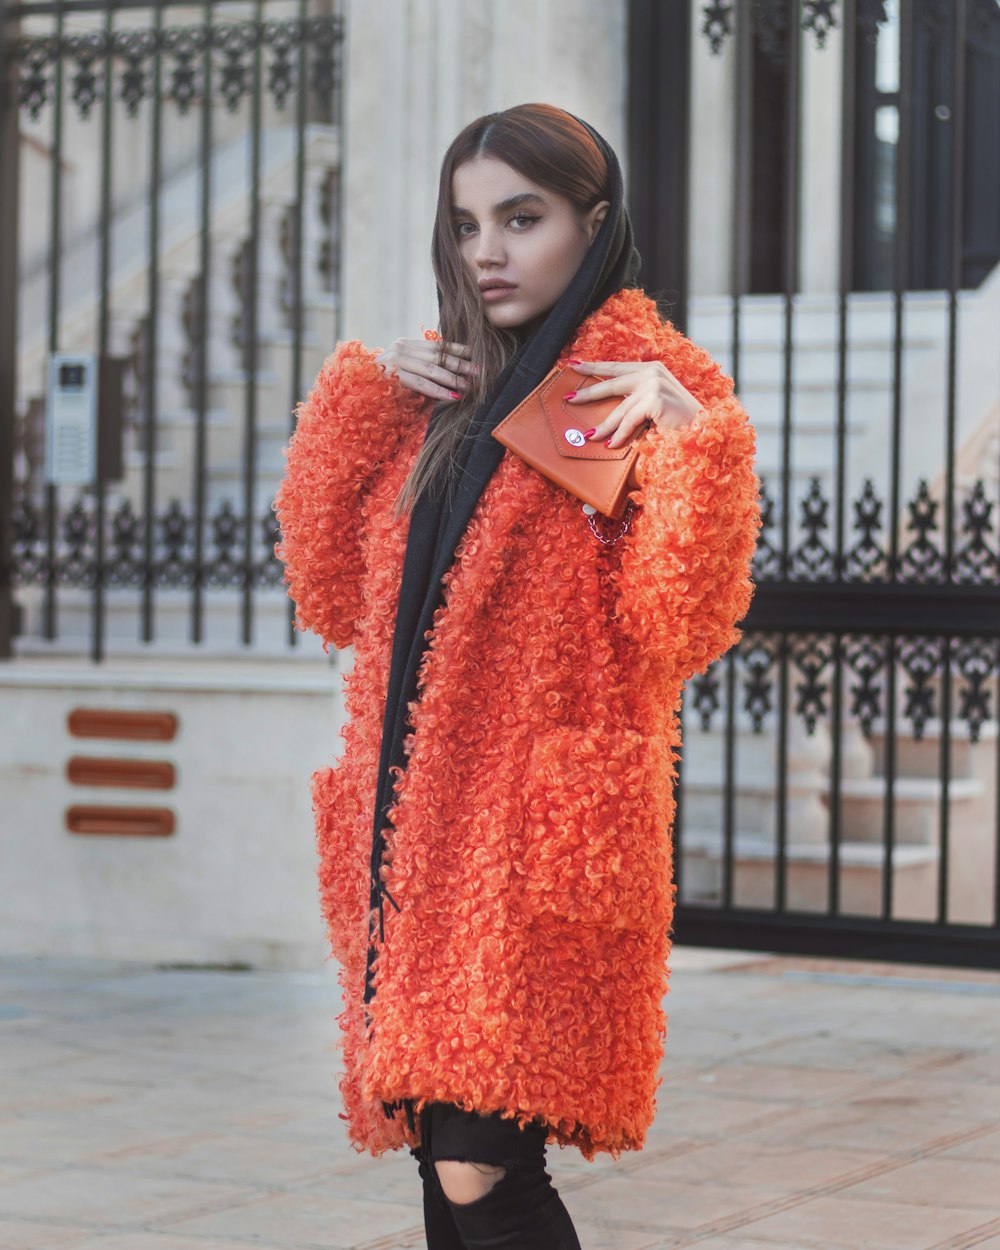 a woman in an orange fuzzy coat and black boots